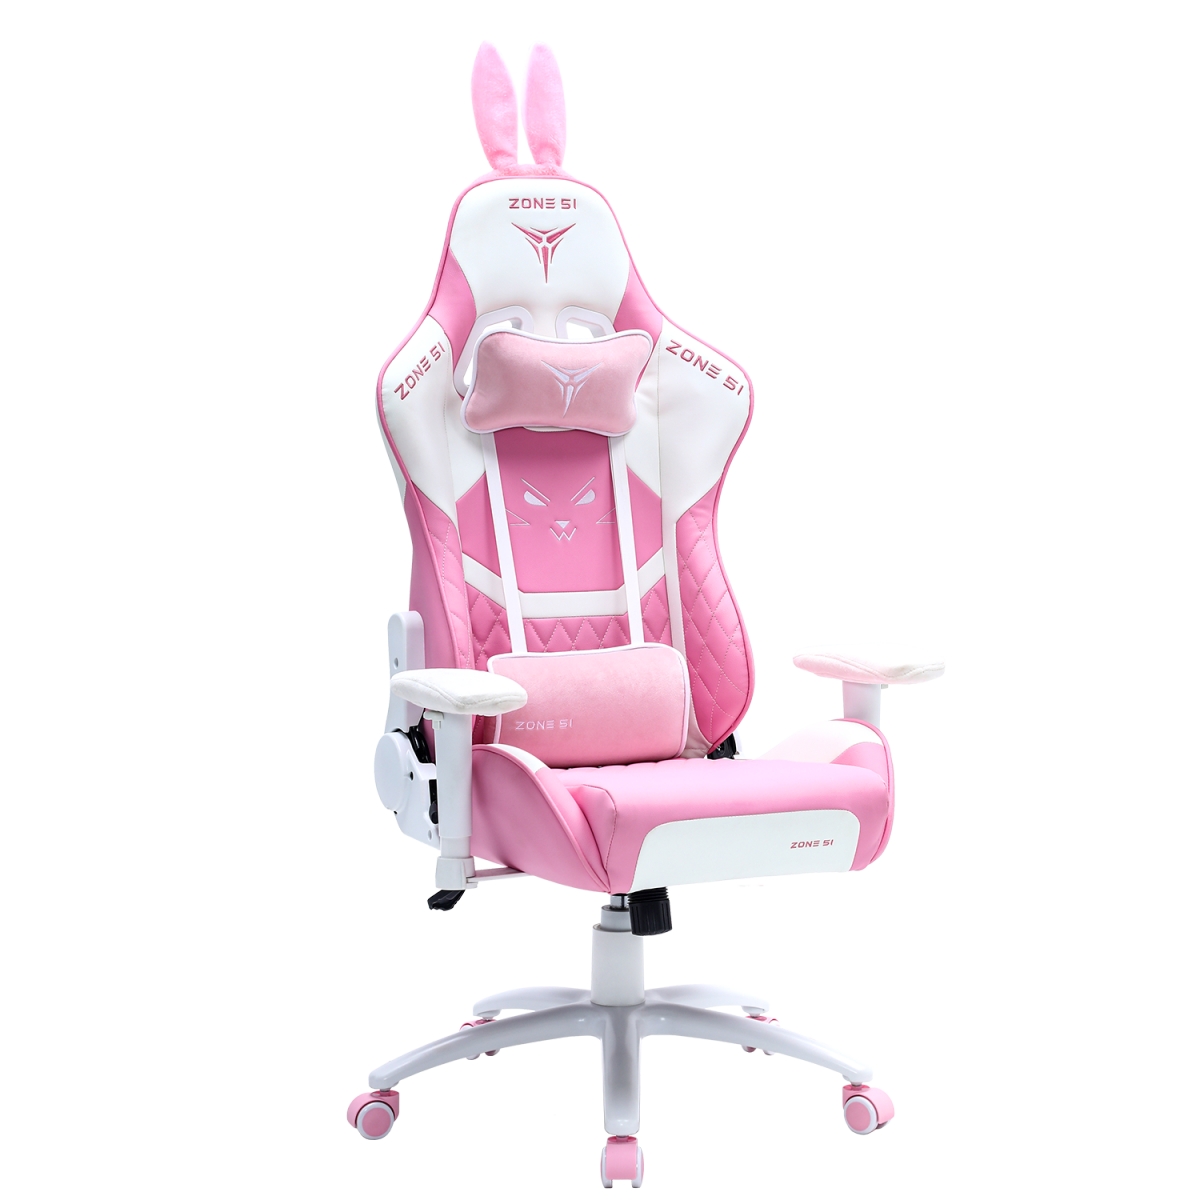     Zone 51 Bunny Pink - 